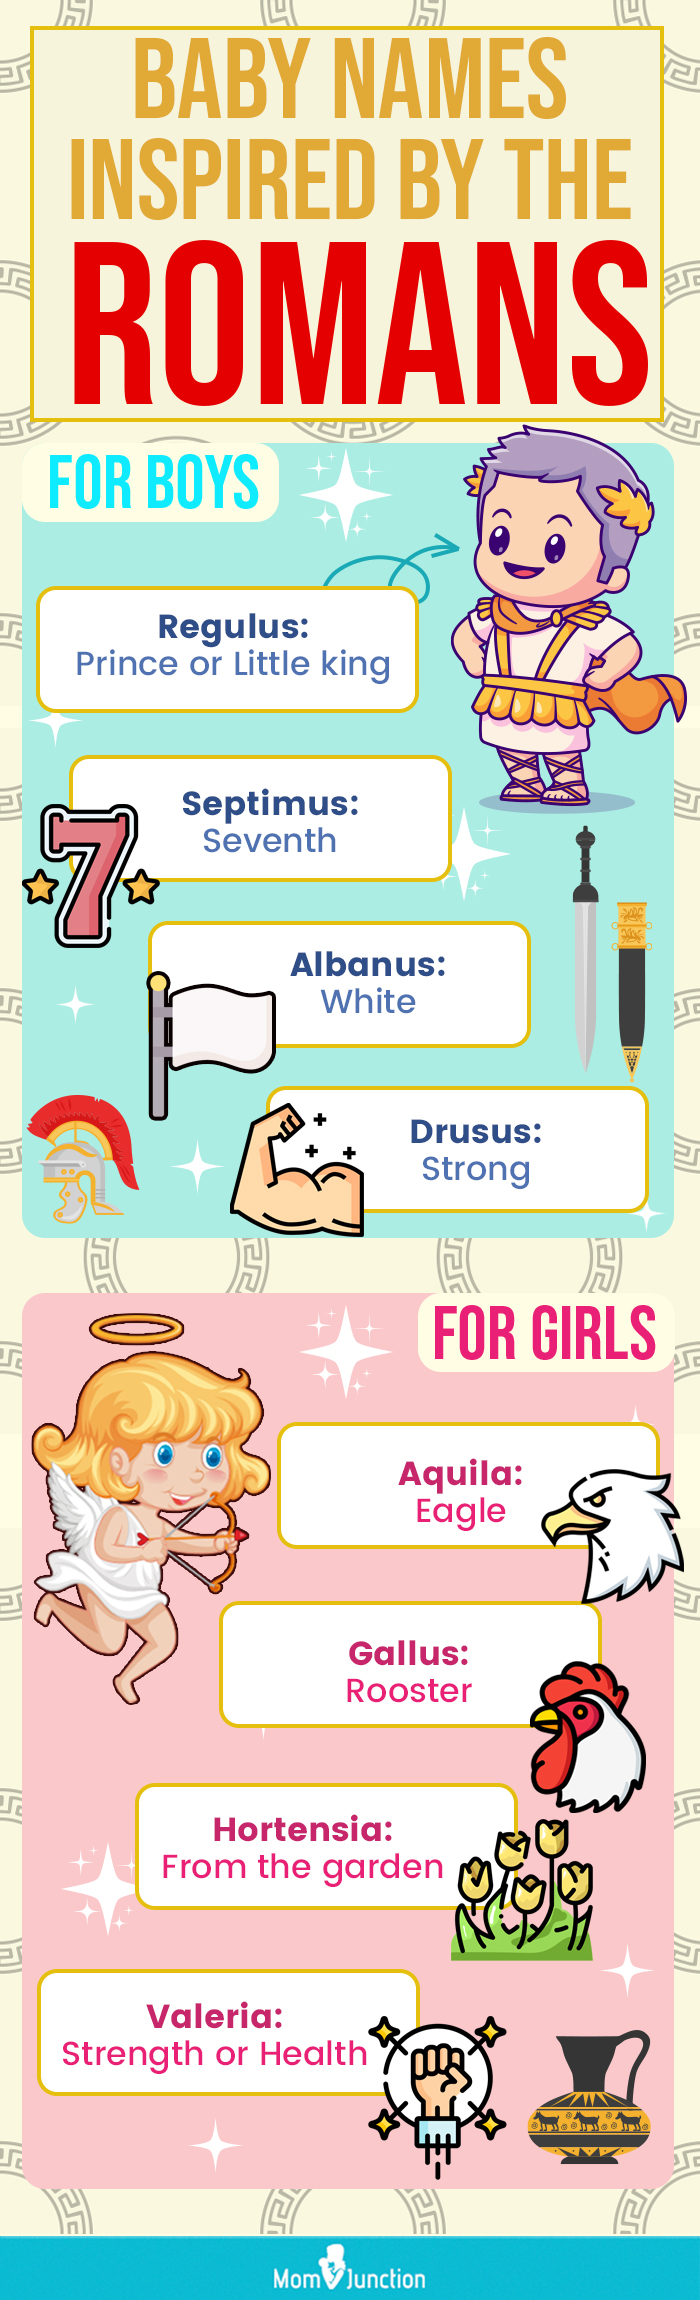 baby names inspired by the romans (infographic)